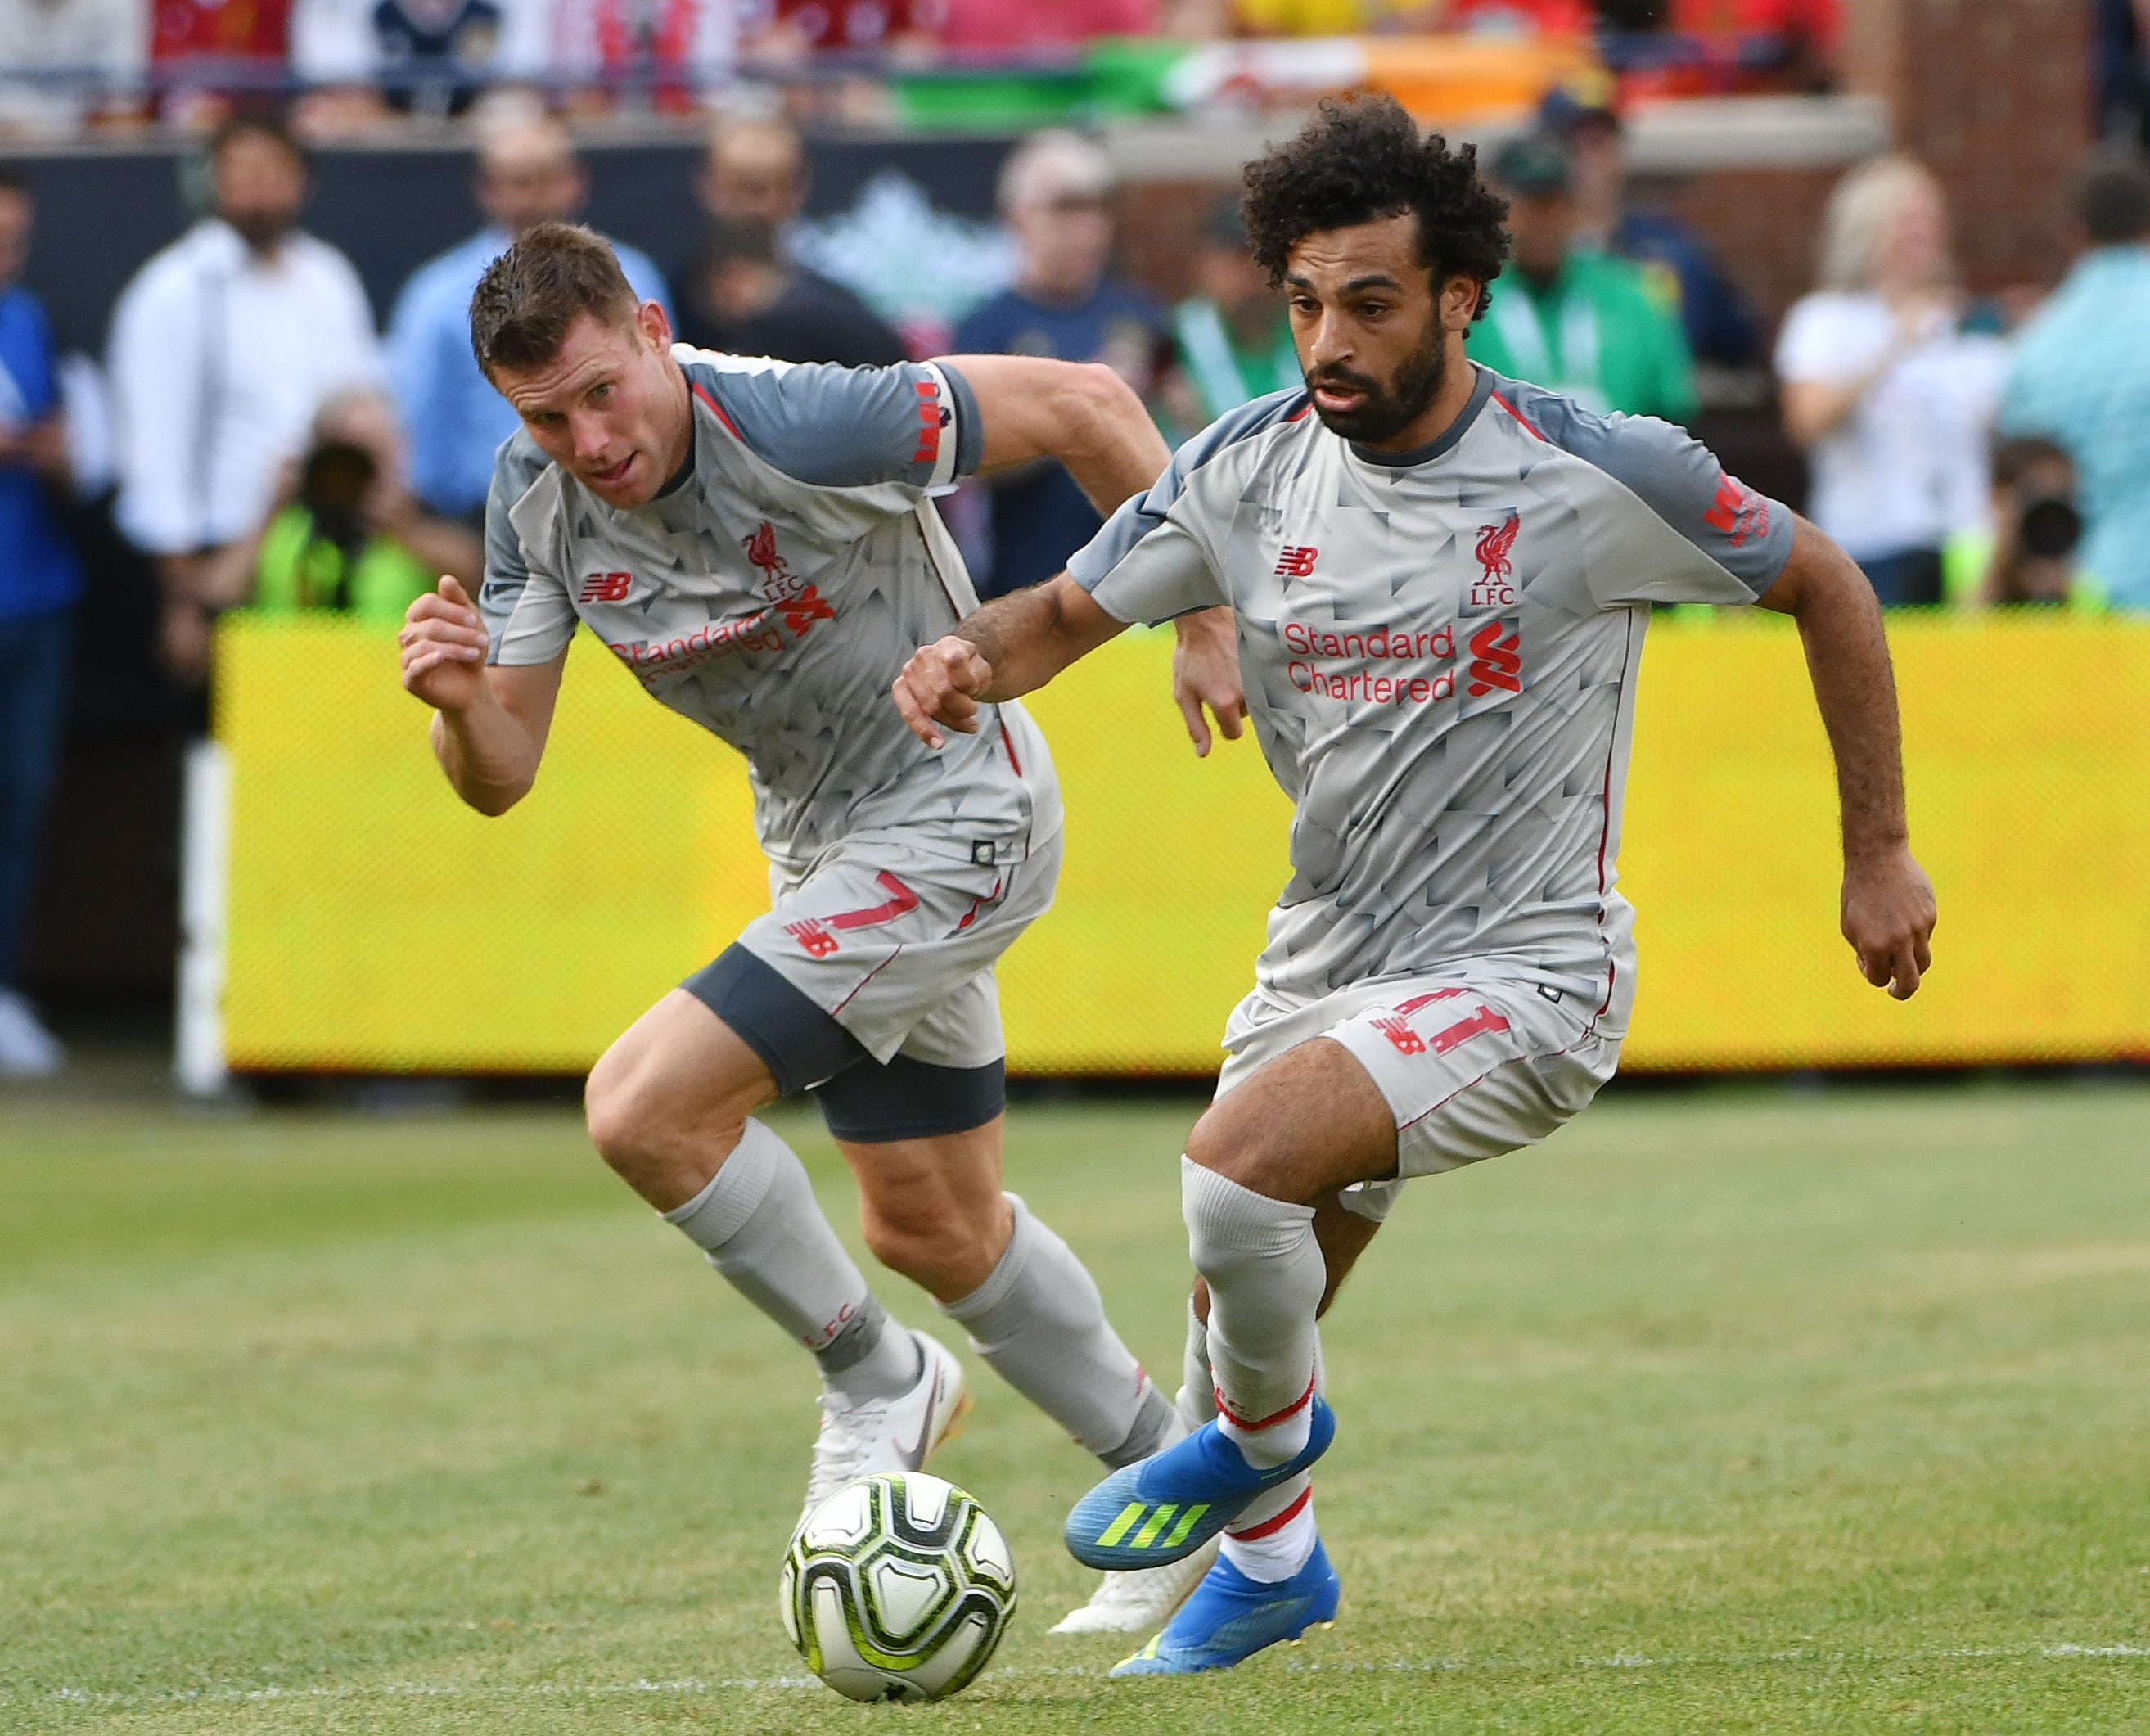 Liverpool's James Milner and Mohamed Salah bring the ball up field in the first half.